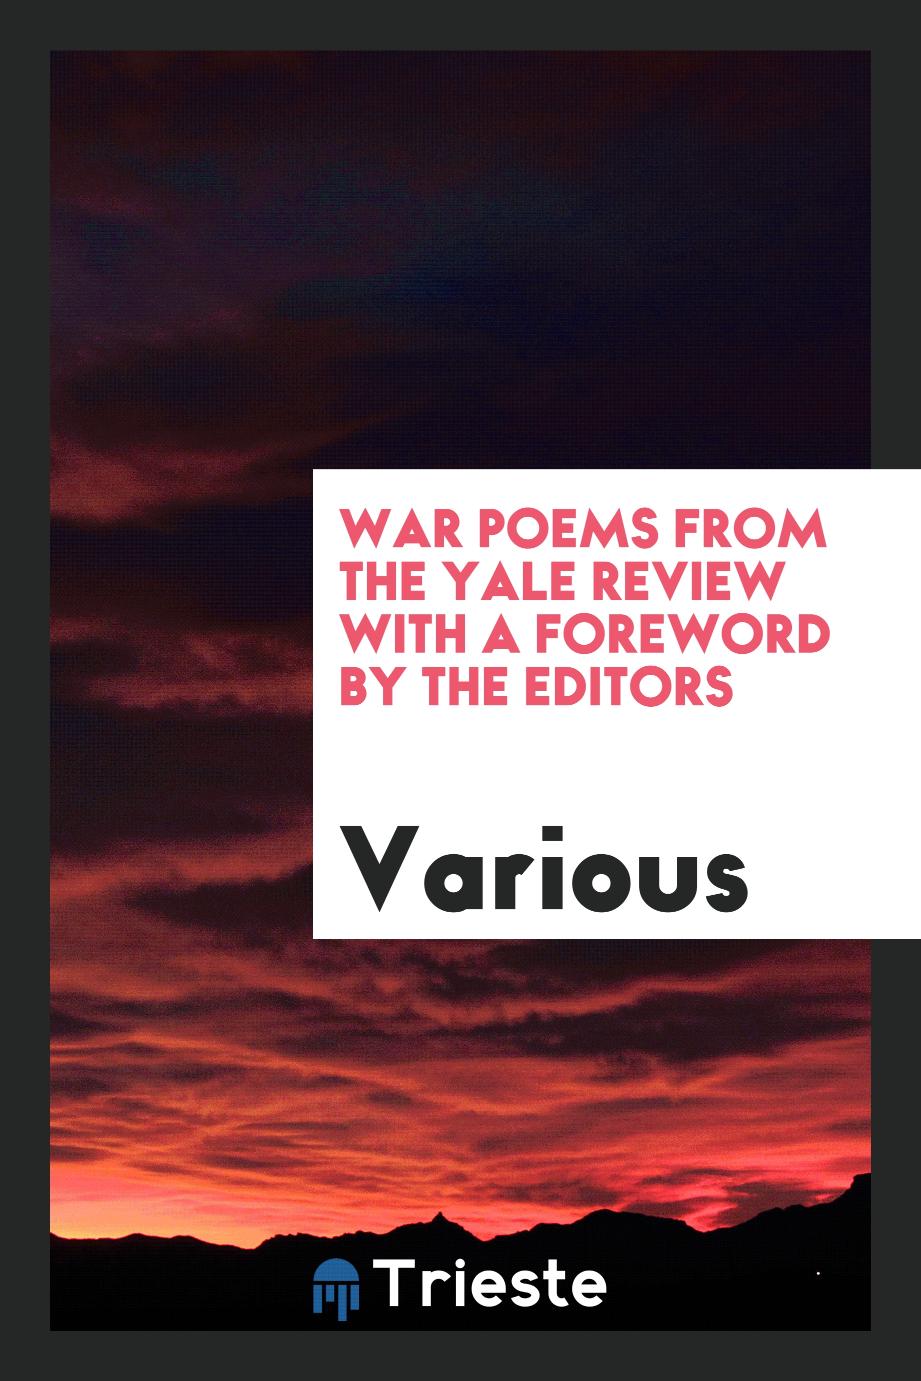 War poems from the Yale review with a foreword by the editors